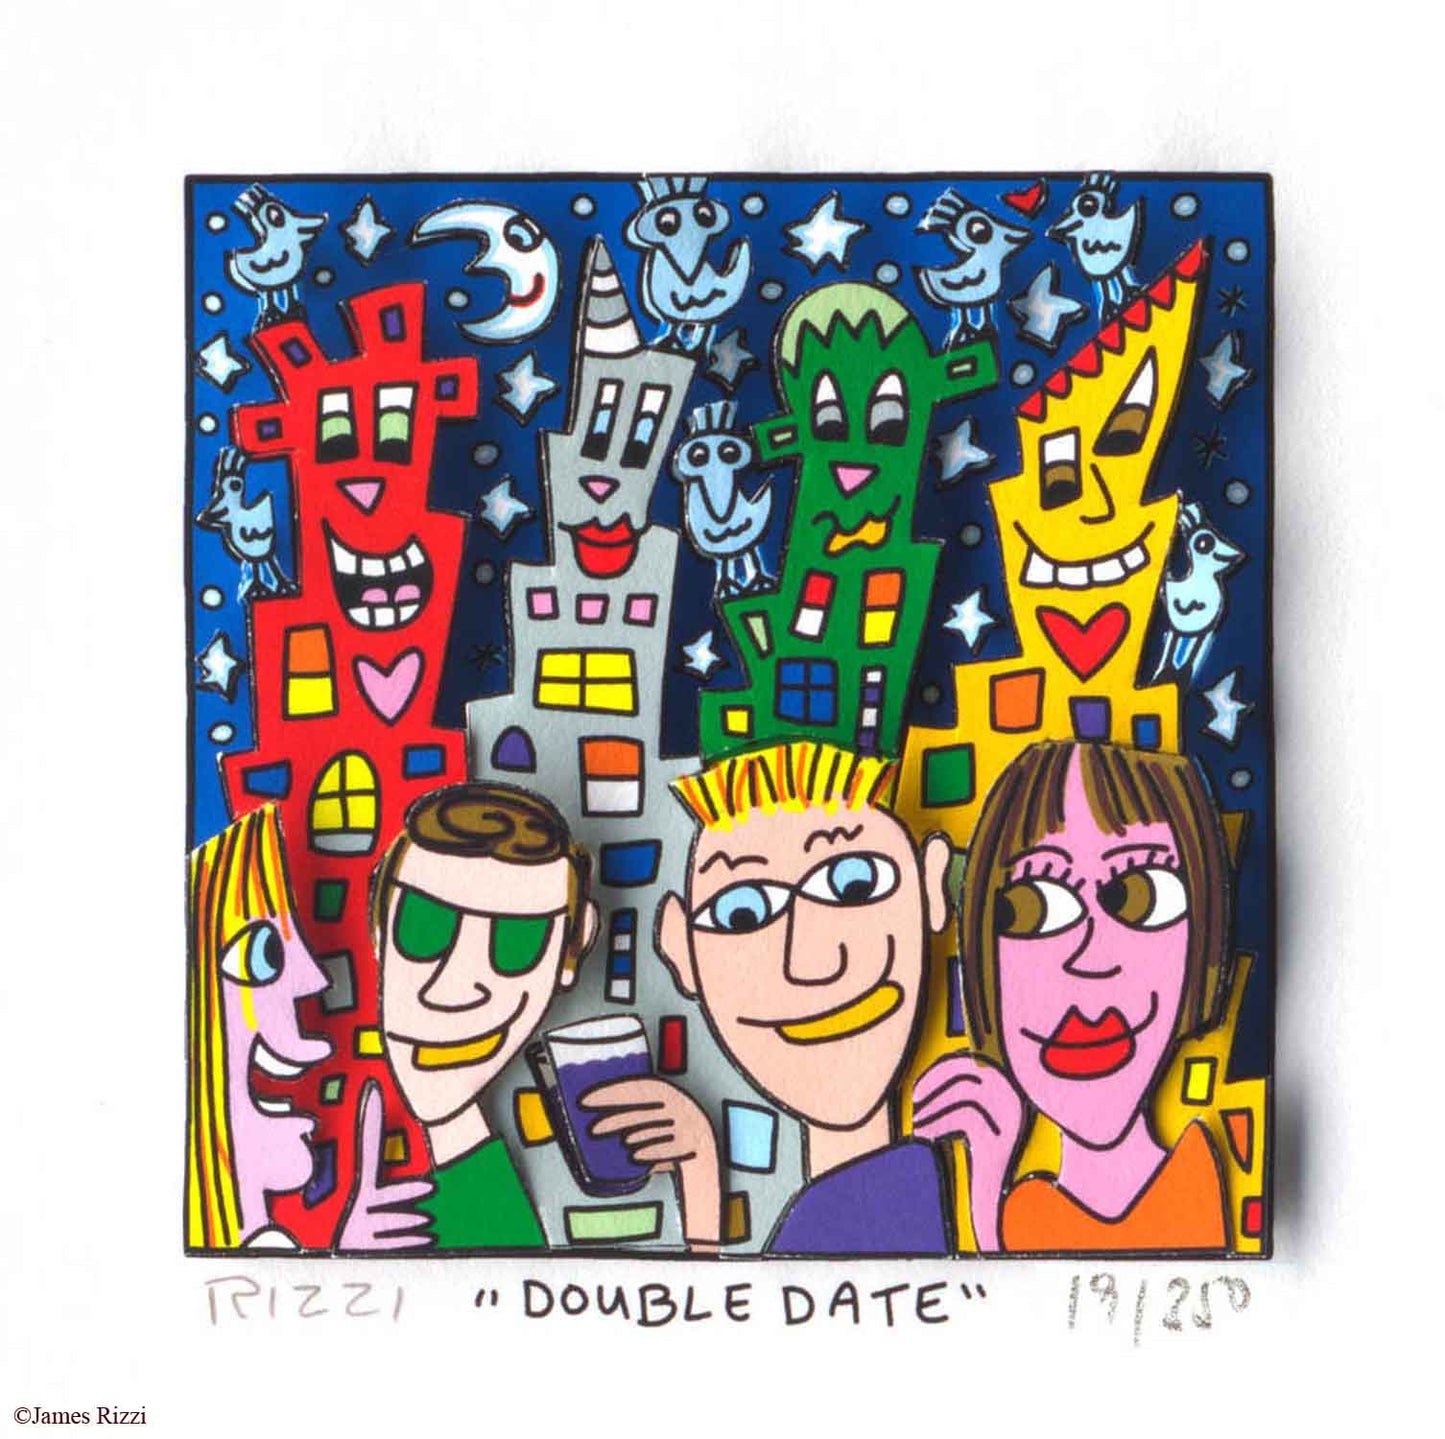 Double date